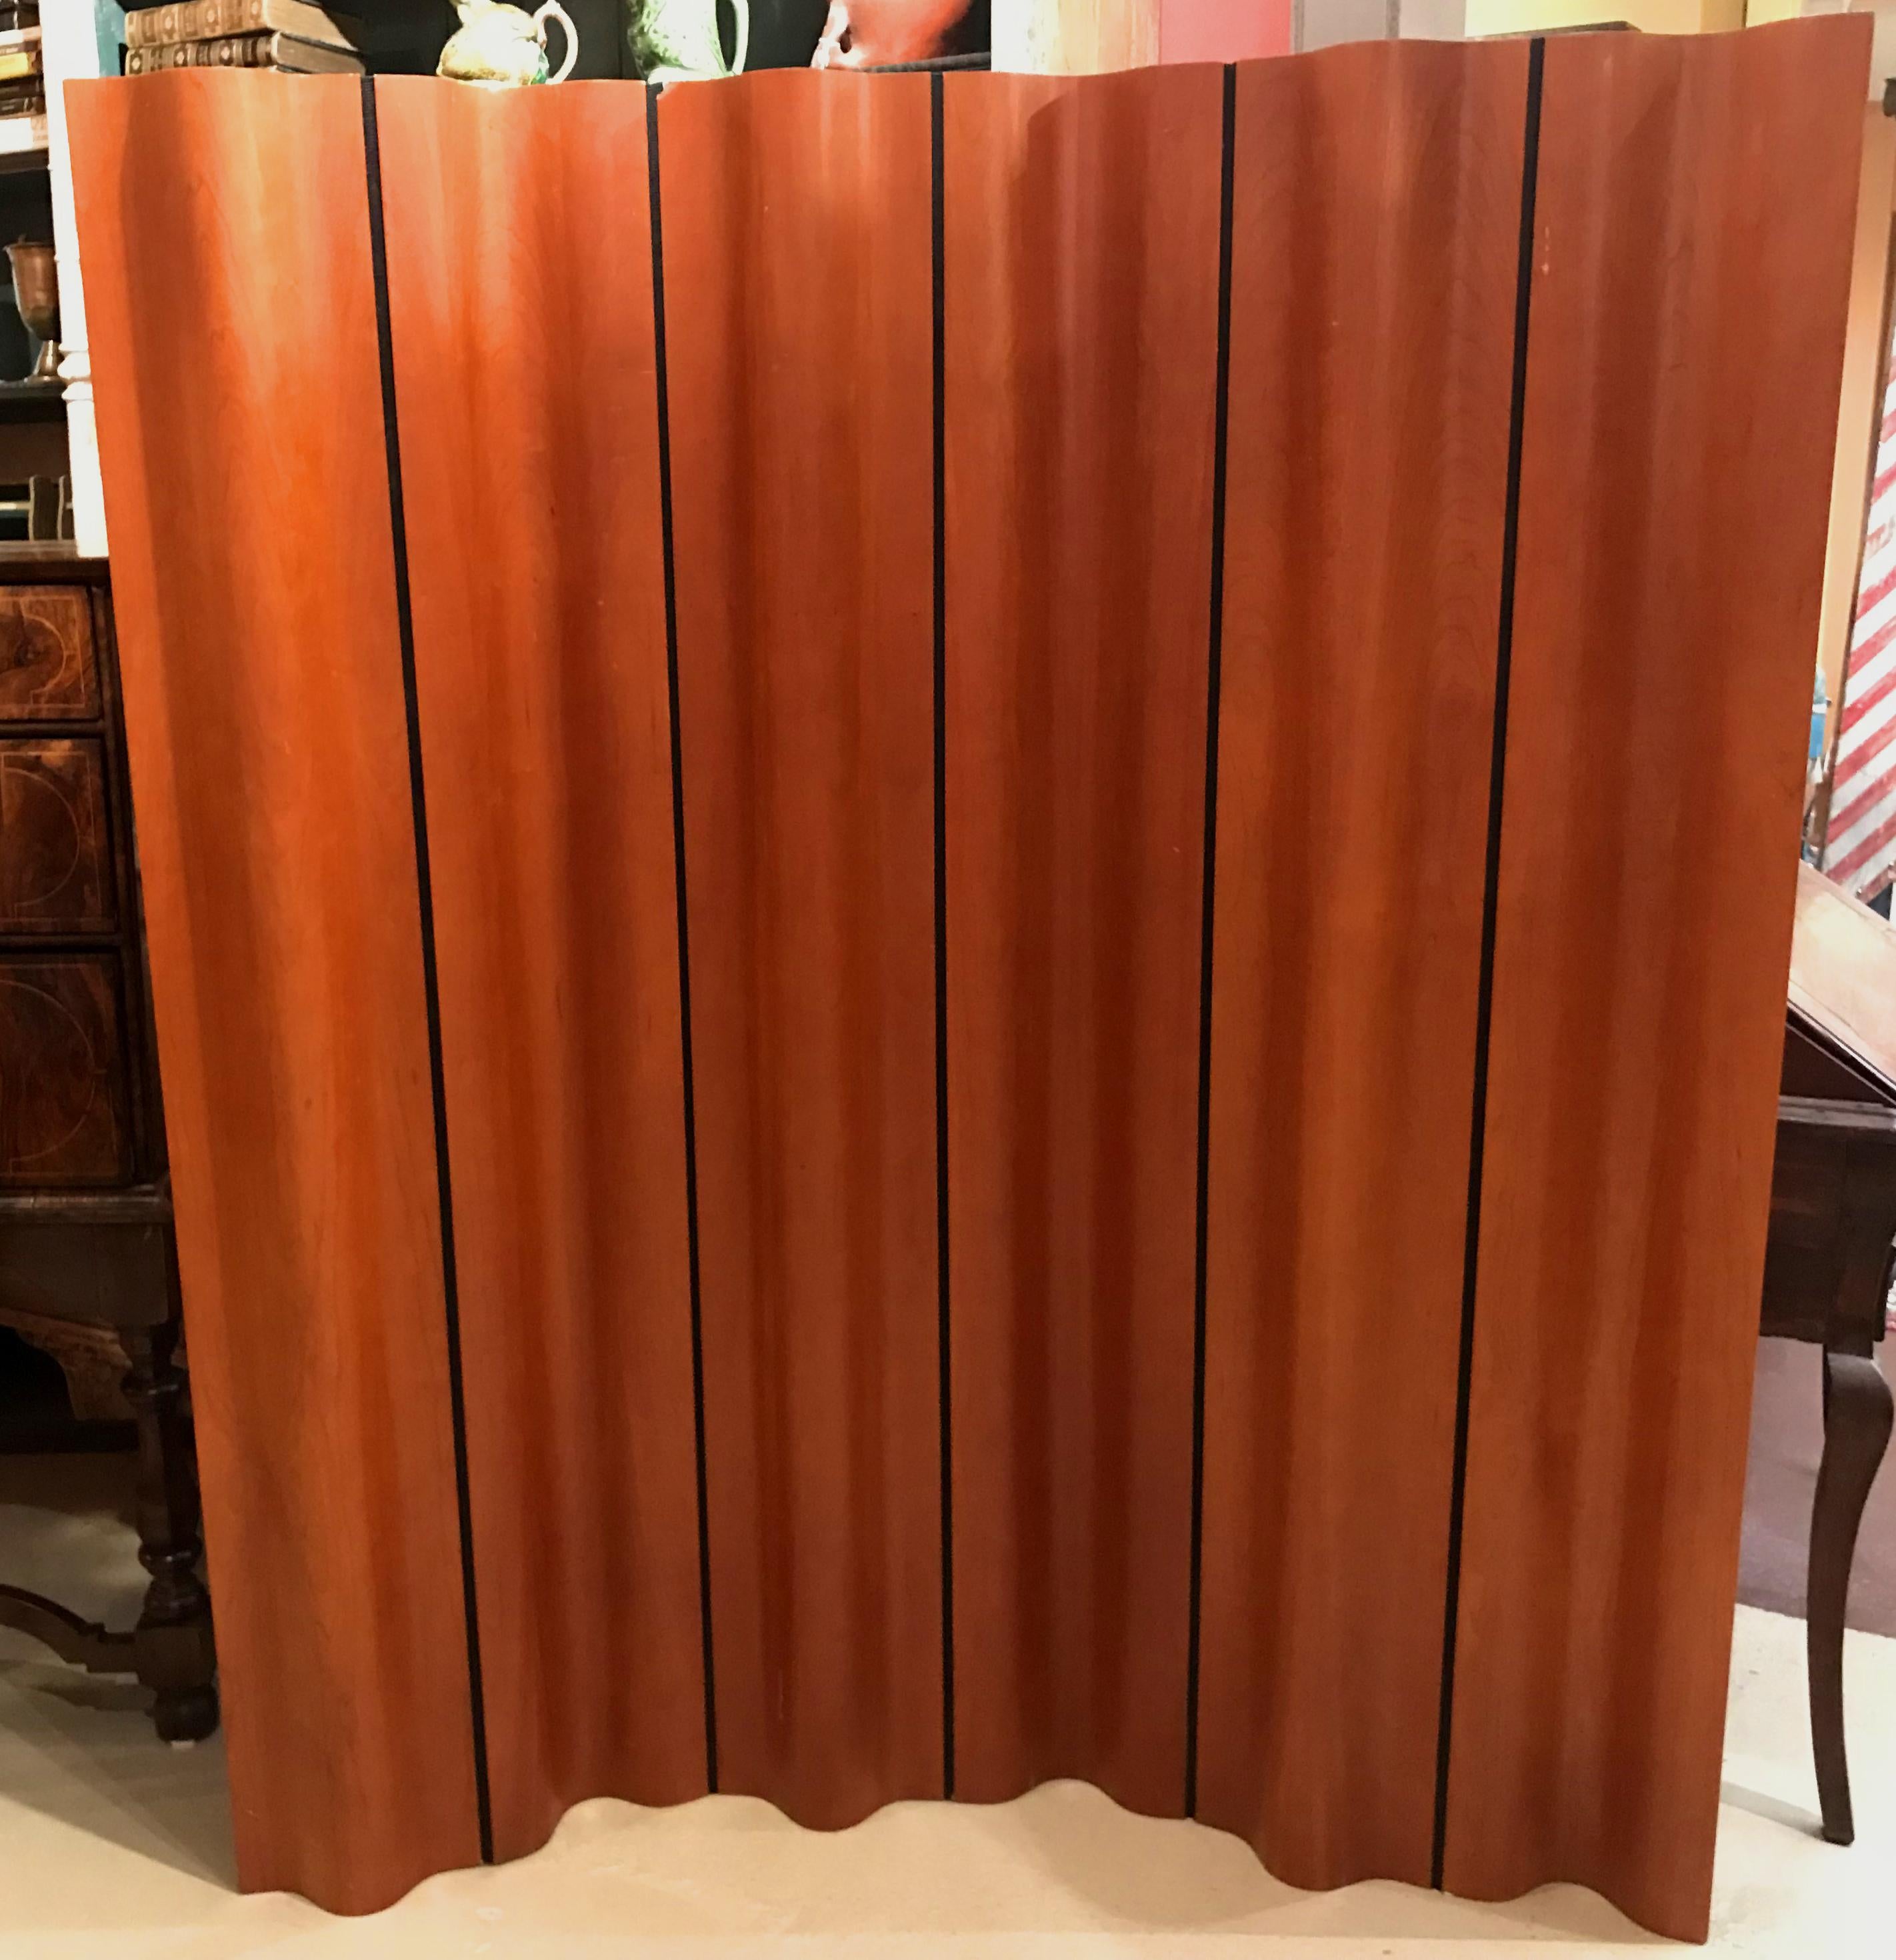 Molded Eames Cherry Plywood Six Panel Folding Screen for Herman Miller